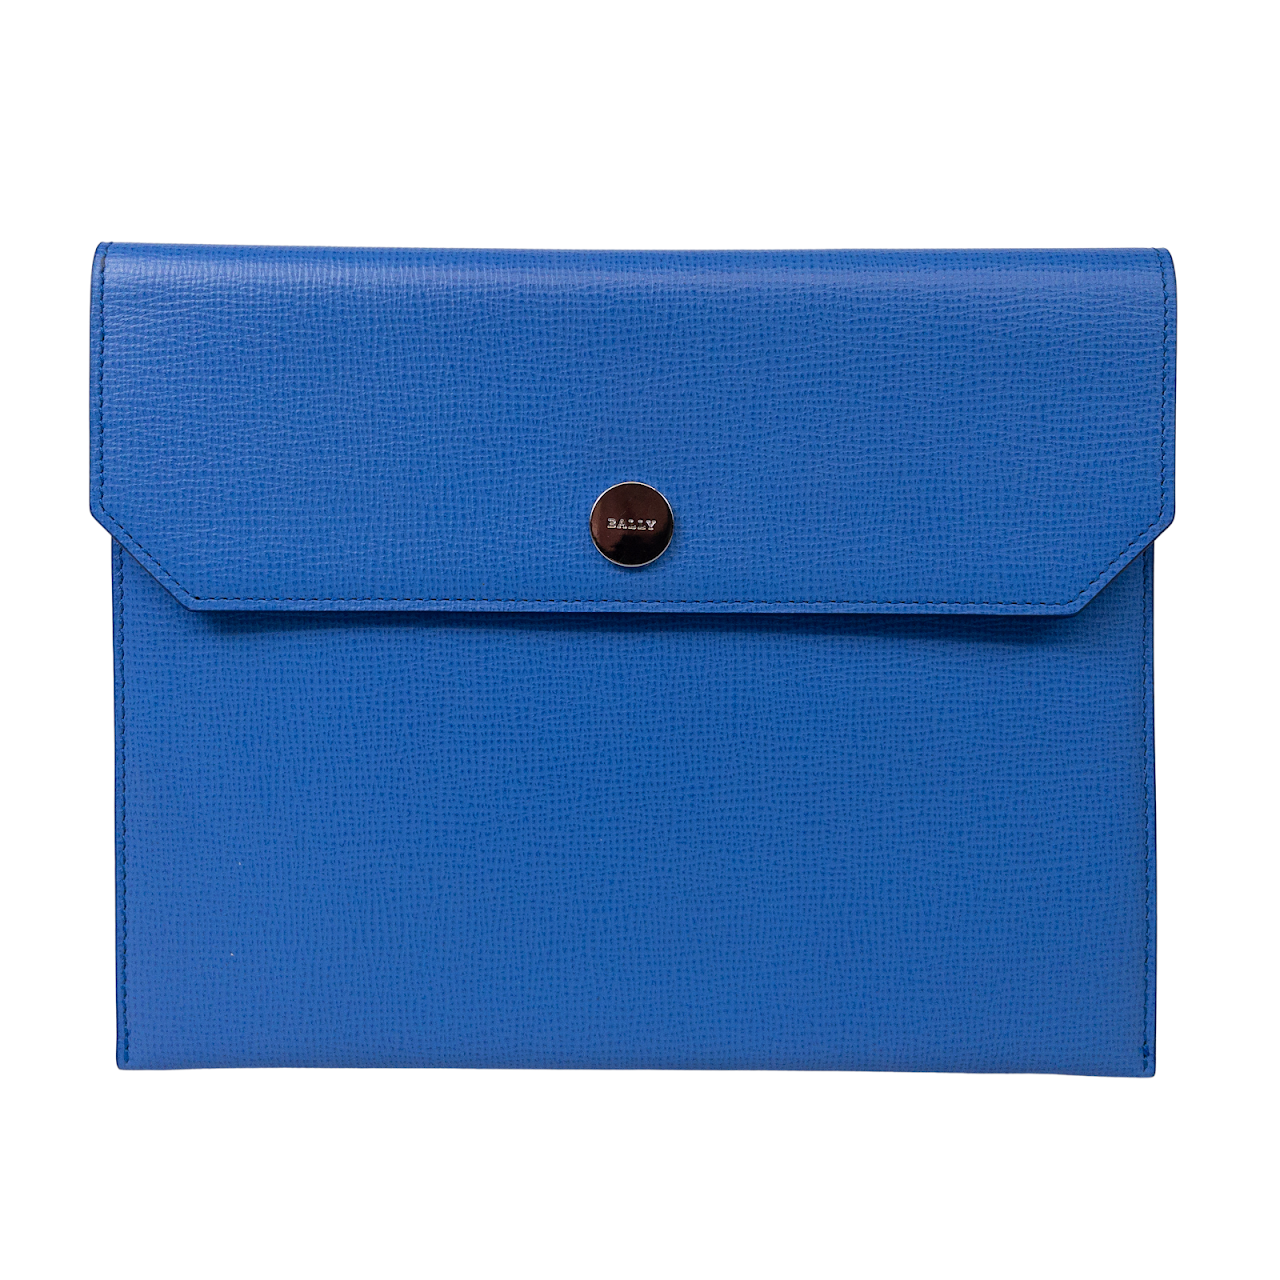 Bally Leather Envelope Clutch